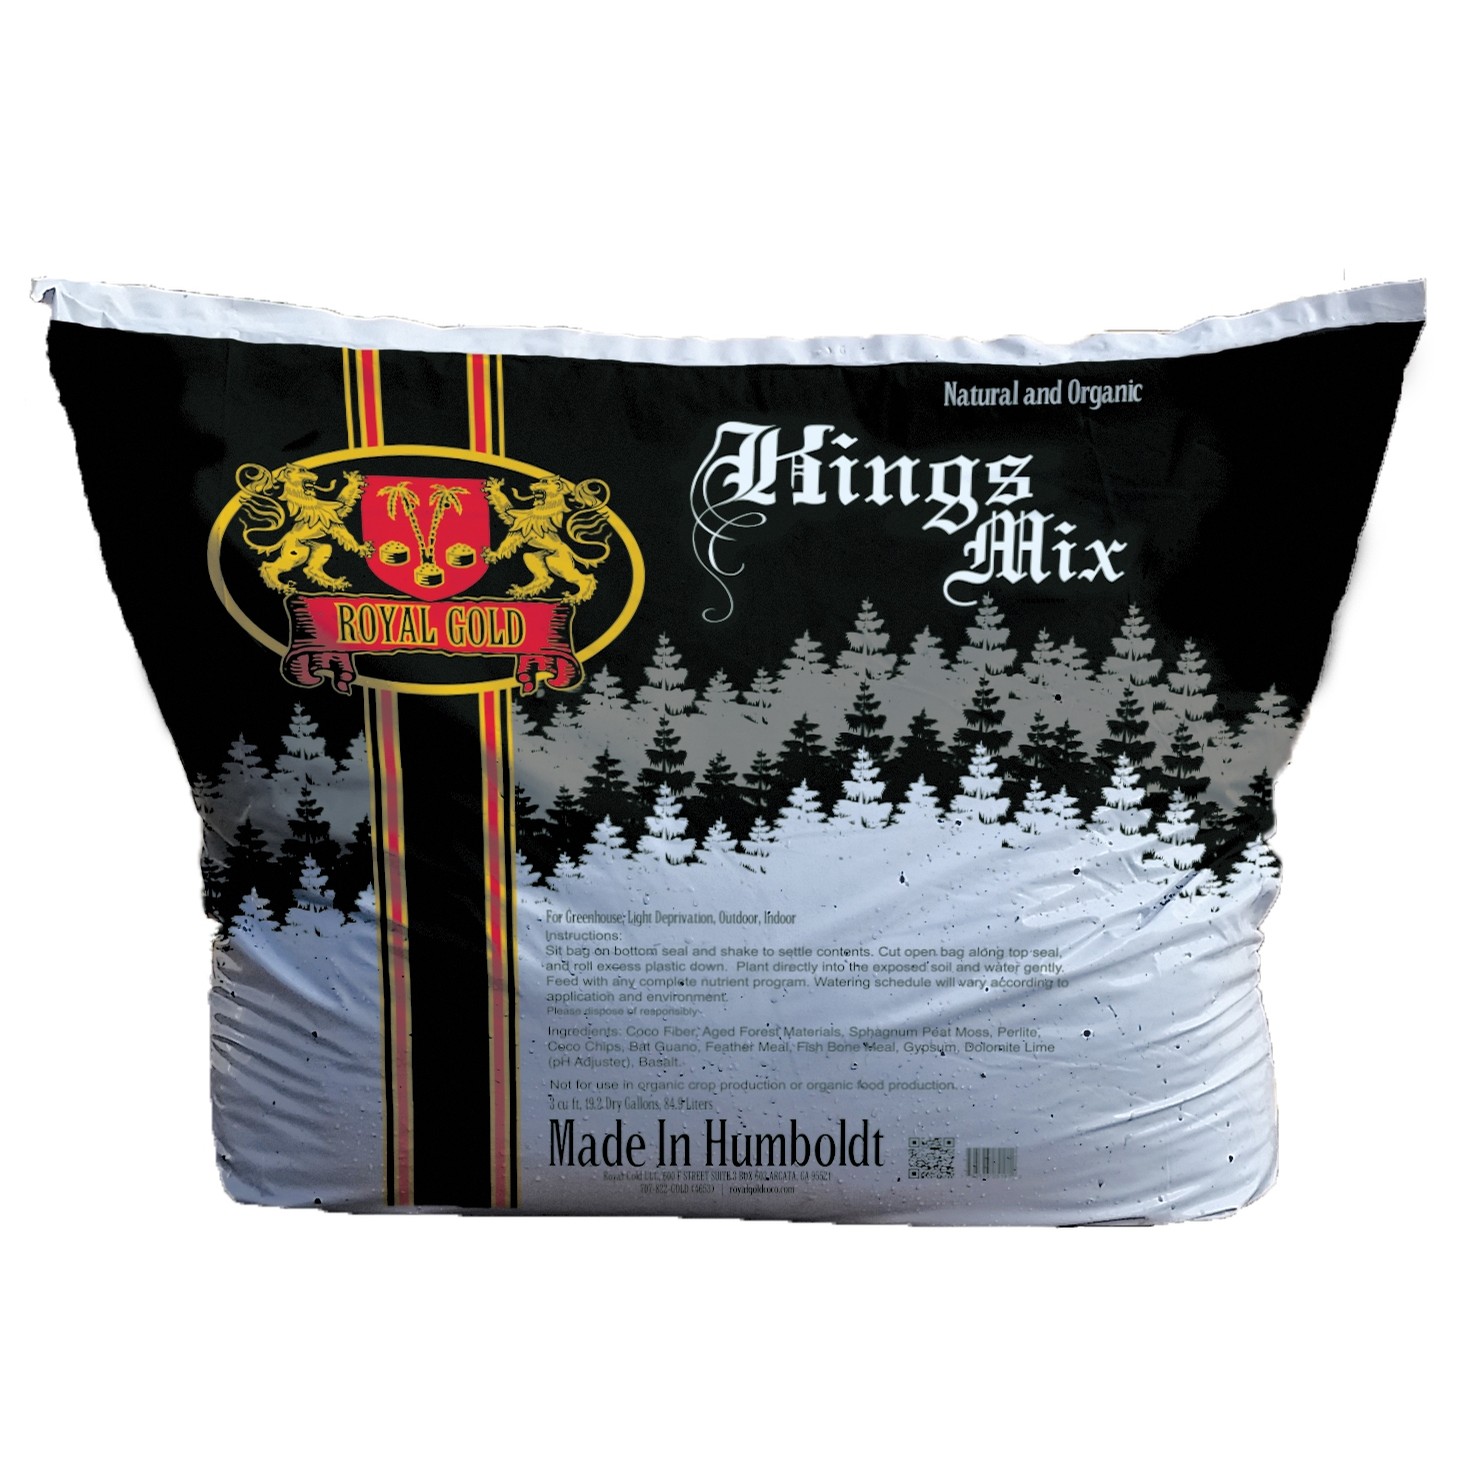 Picture for Royal Gold Kings Mix, 3 cu ft